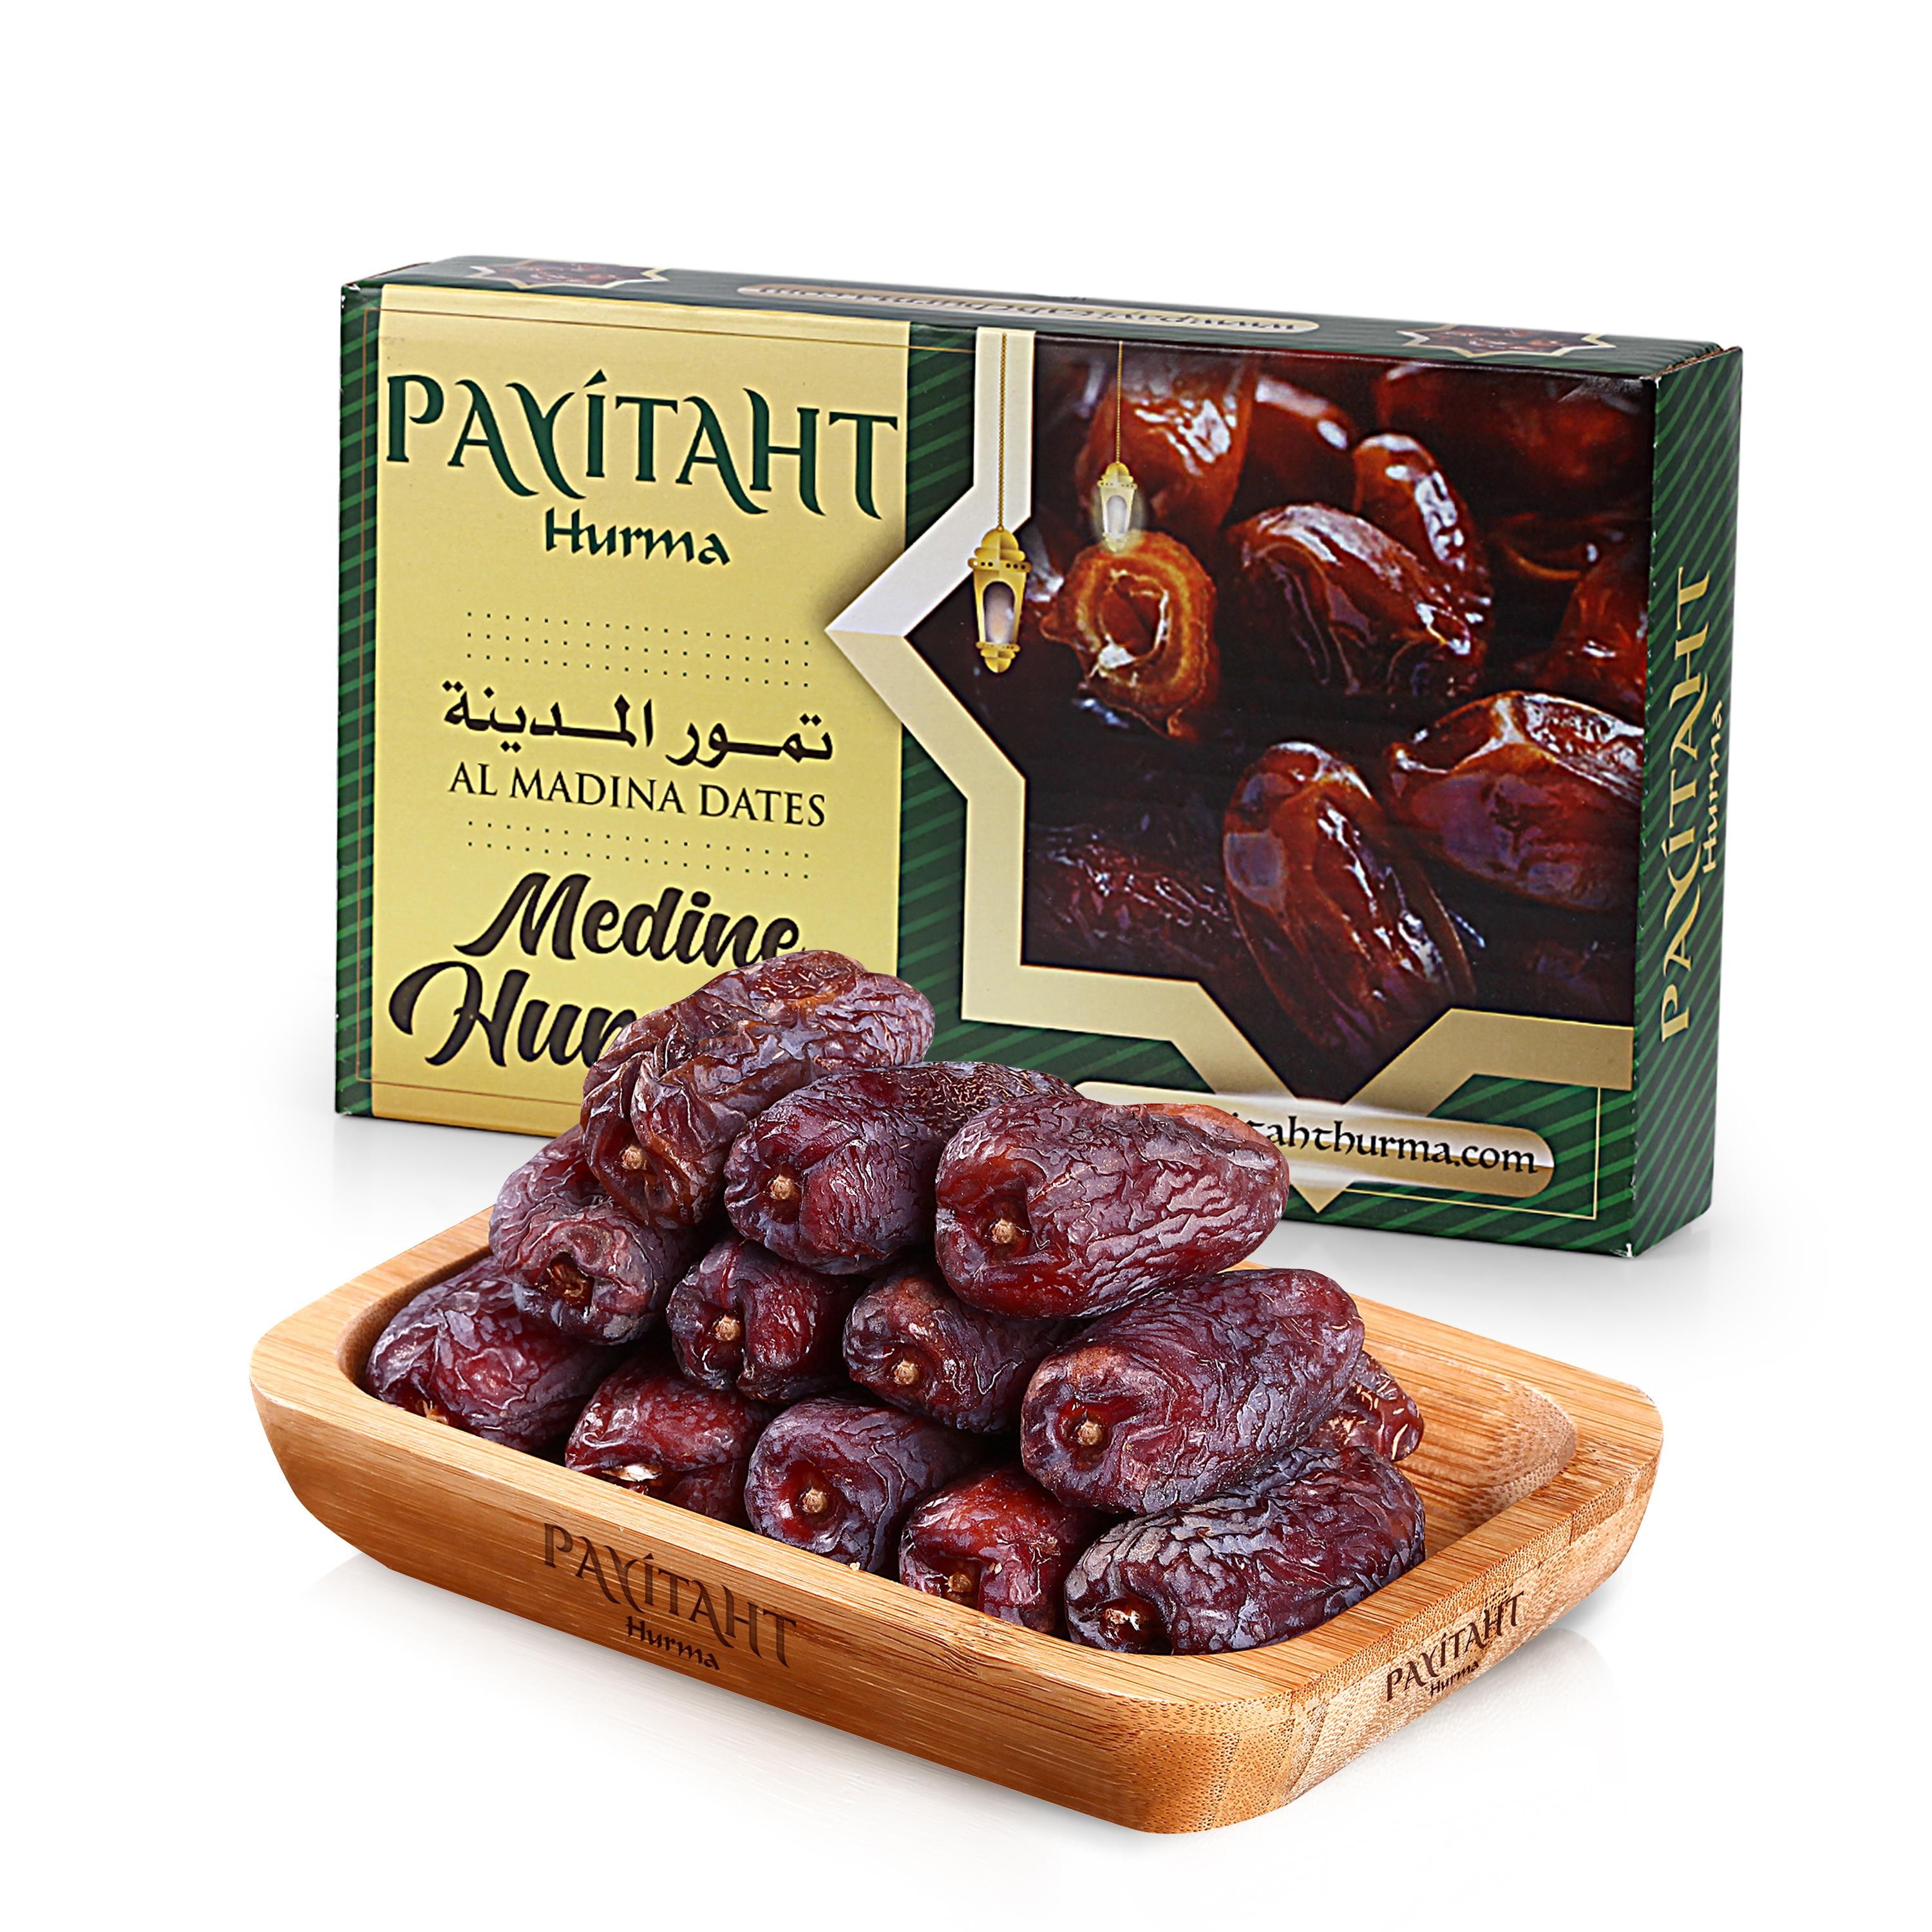 Payitaht Hurma Medine Amber Double Dates 1 KG